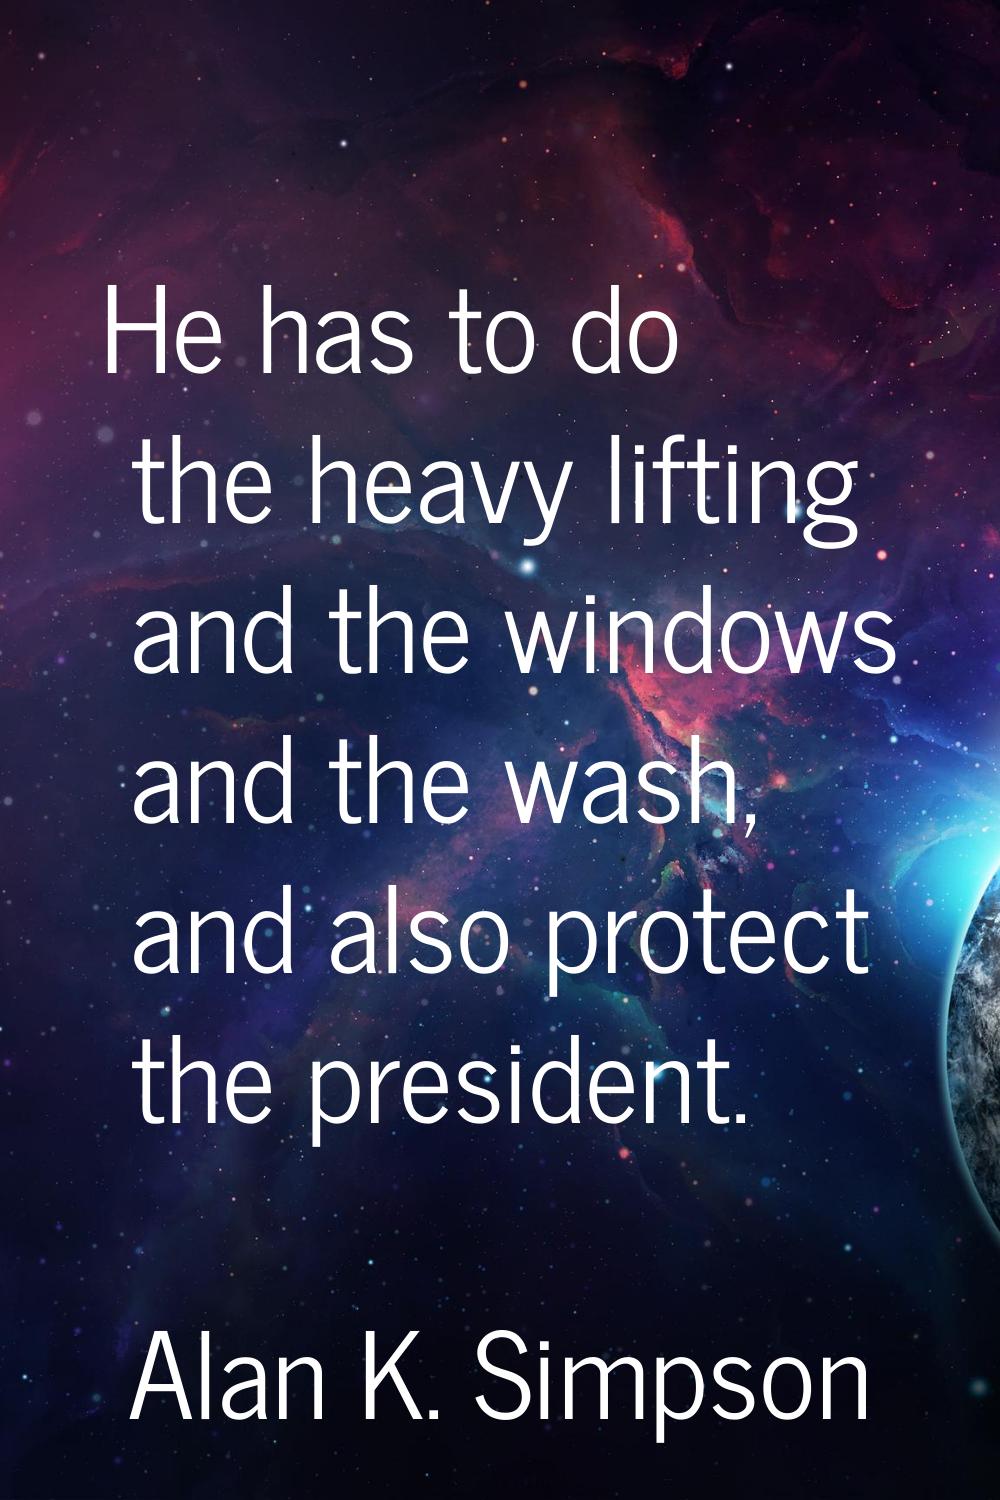 He has to do the heavy lifting and the windows and the wash, and also protect the president.